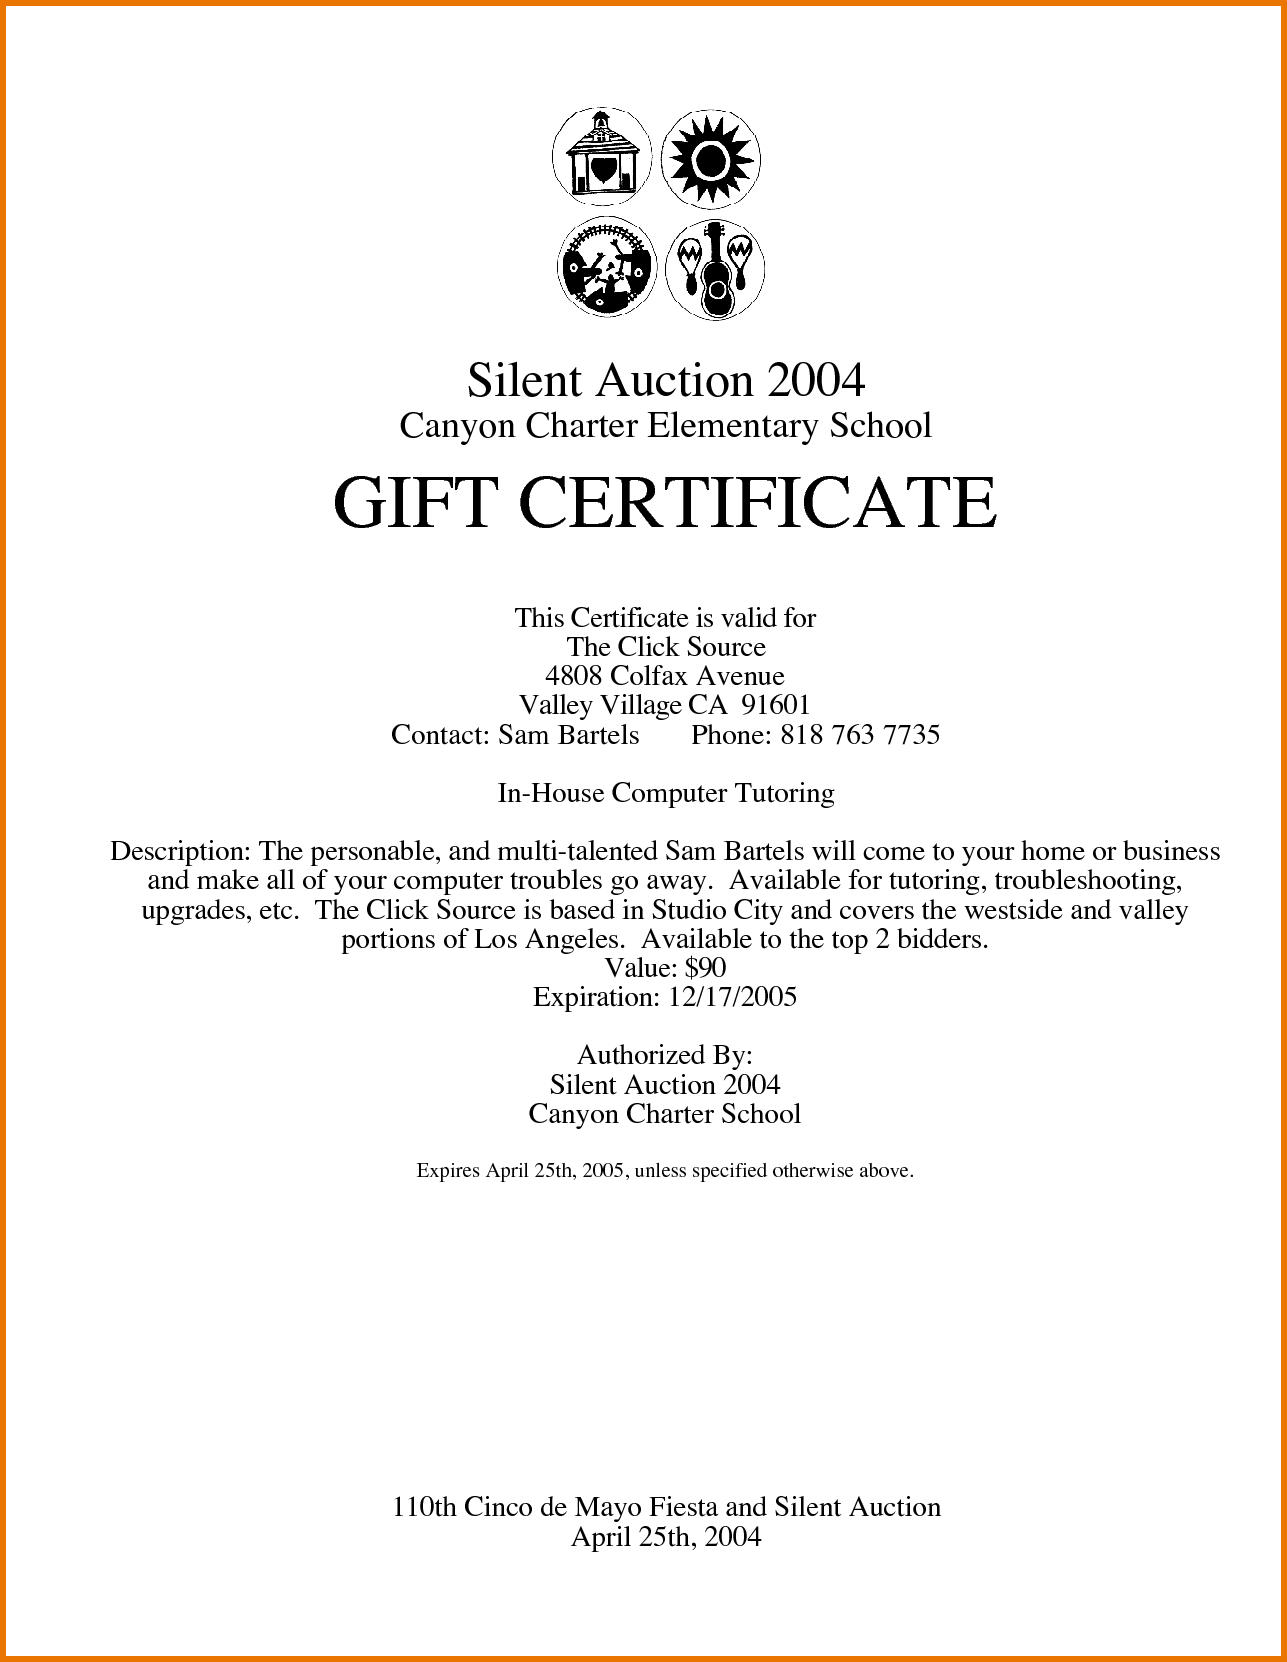 Donation Certificate Template.4187734 | Scope Of Work Regarding Donation Certificate Template